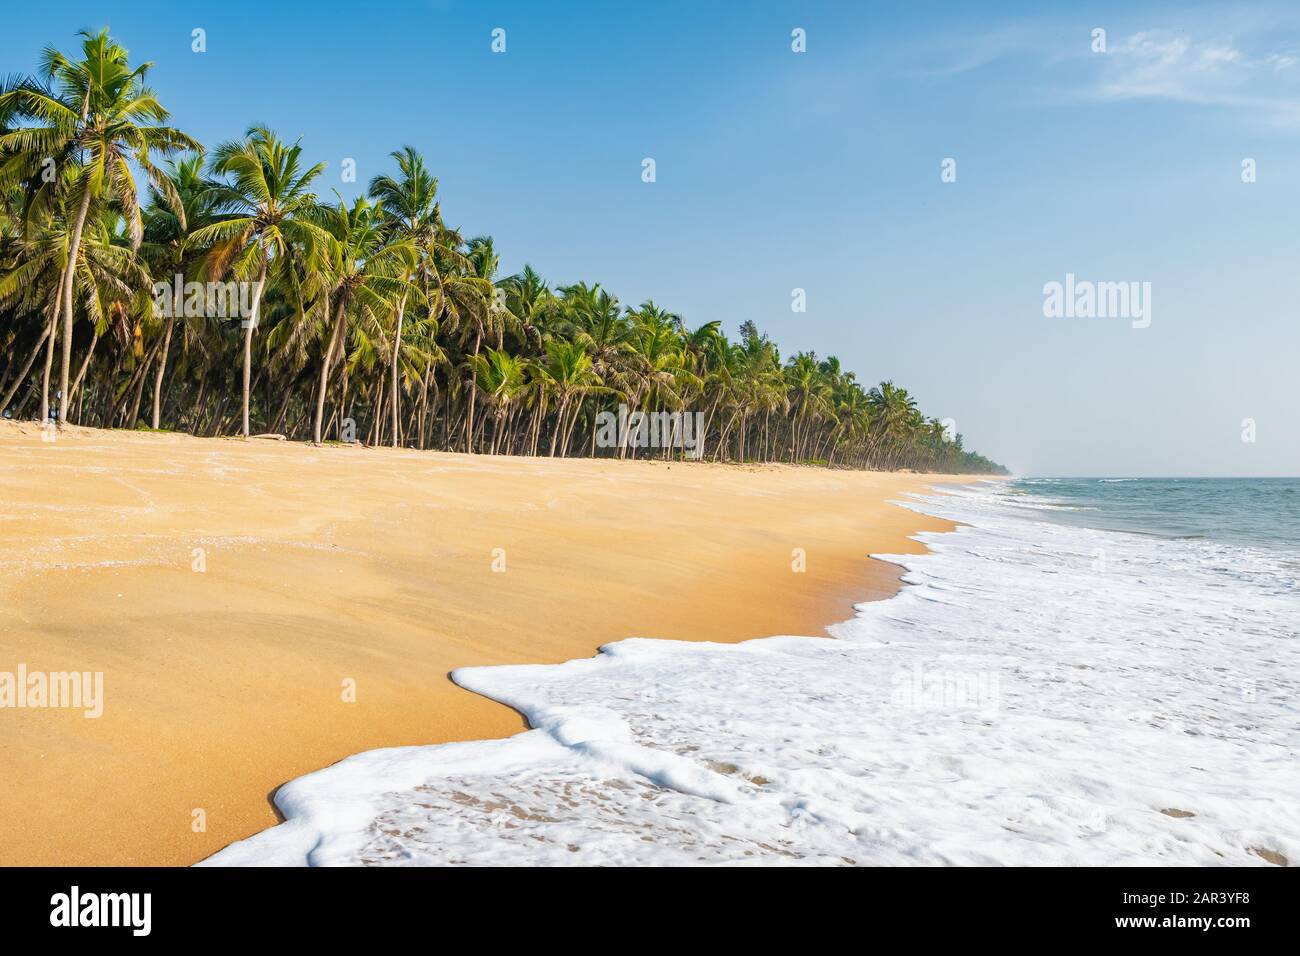 Long empty tropical beach with coconut palms in Kerala, India Stock Photo